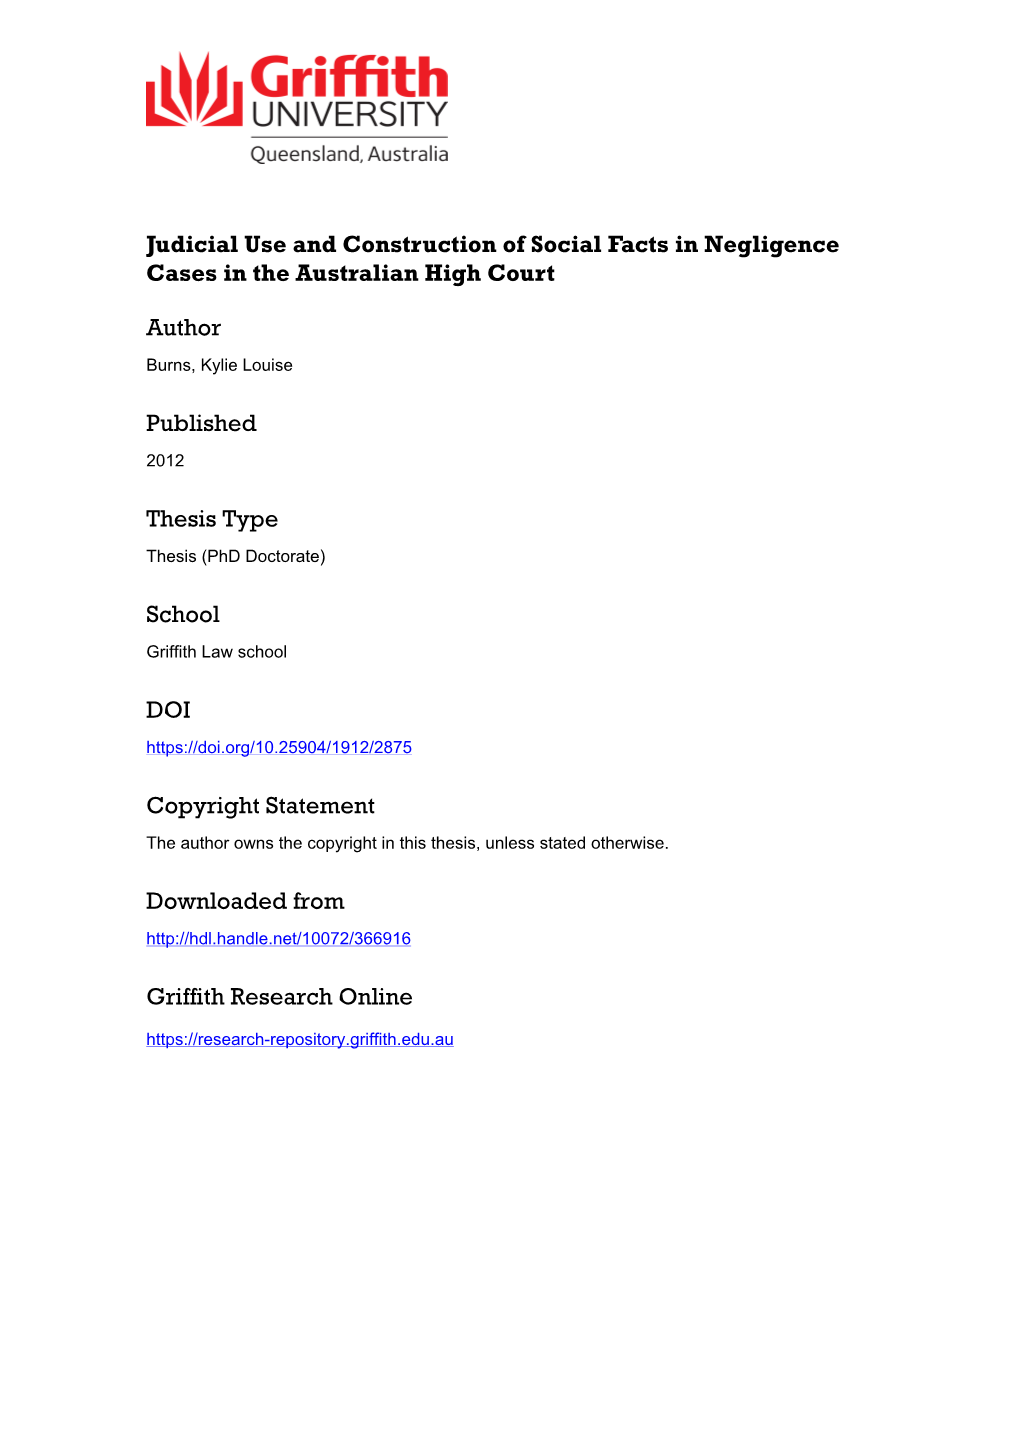 Judicial Use and Construction of Social Facts in Negligence Cases in the Australian High Court